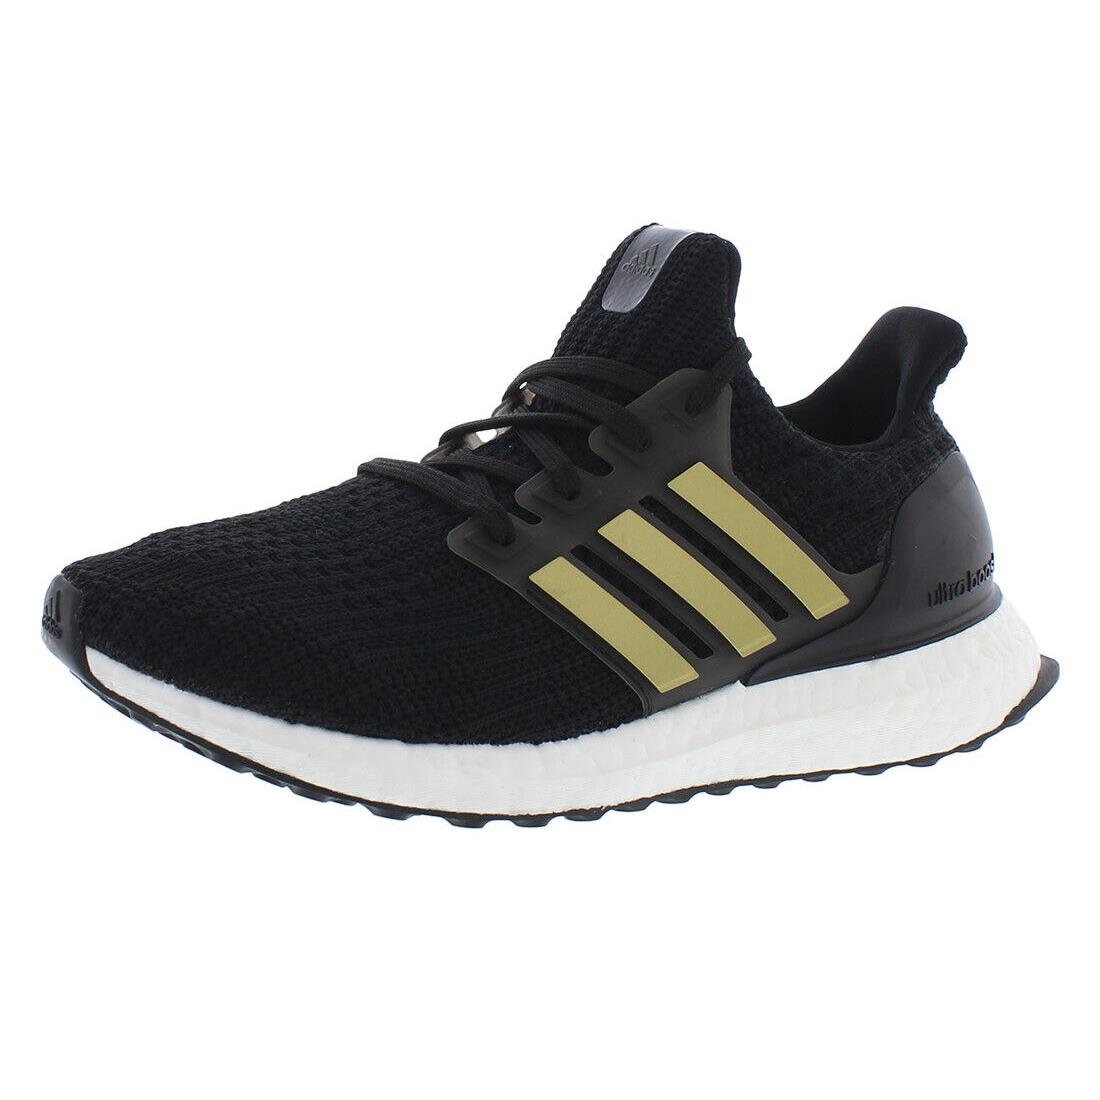 Adidas Ultraboost 4.0 Dna Womens Shoes Size 11 Color: Black/gold Metallic/white